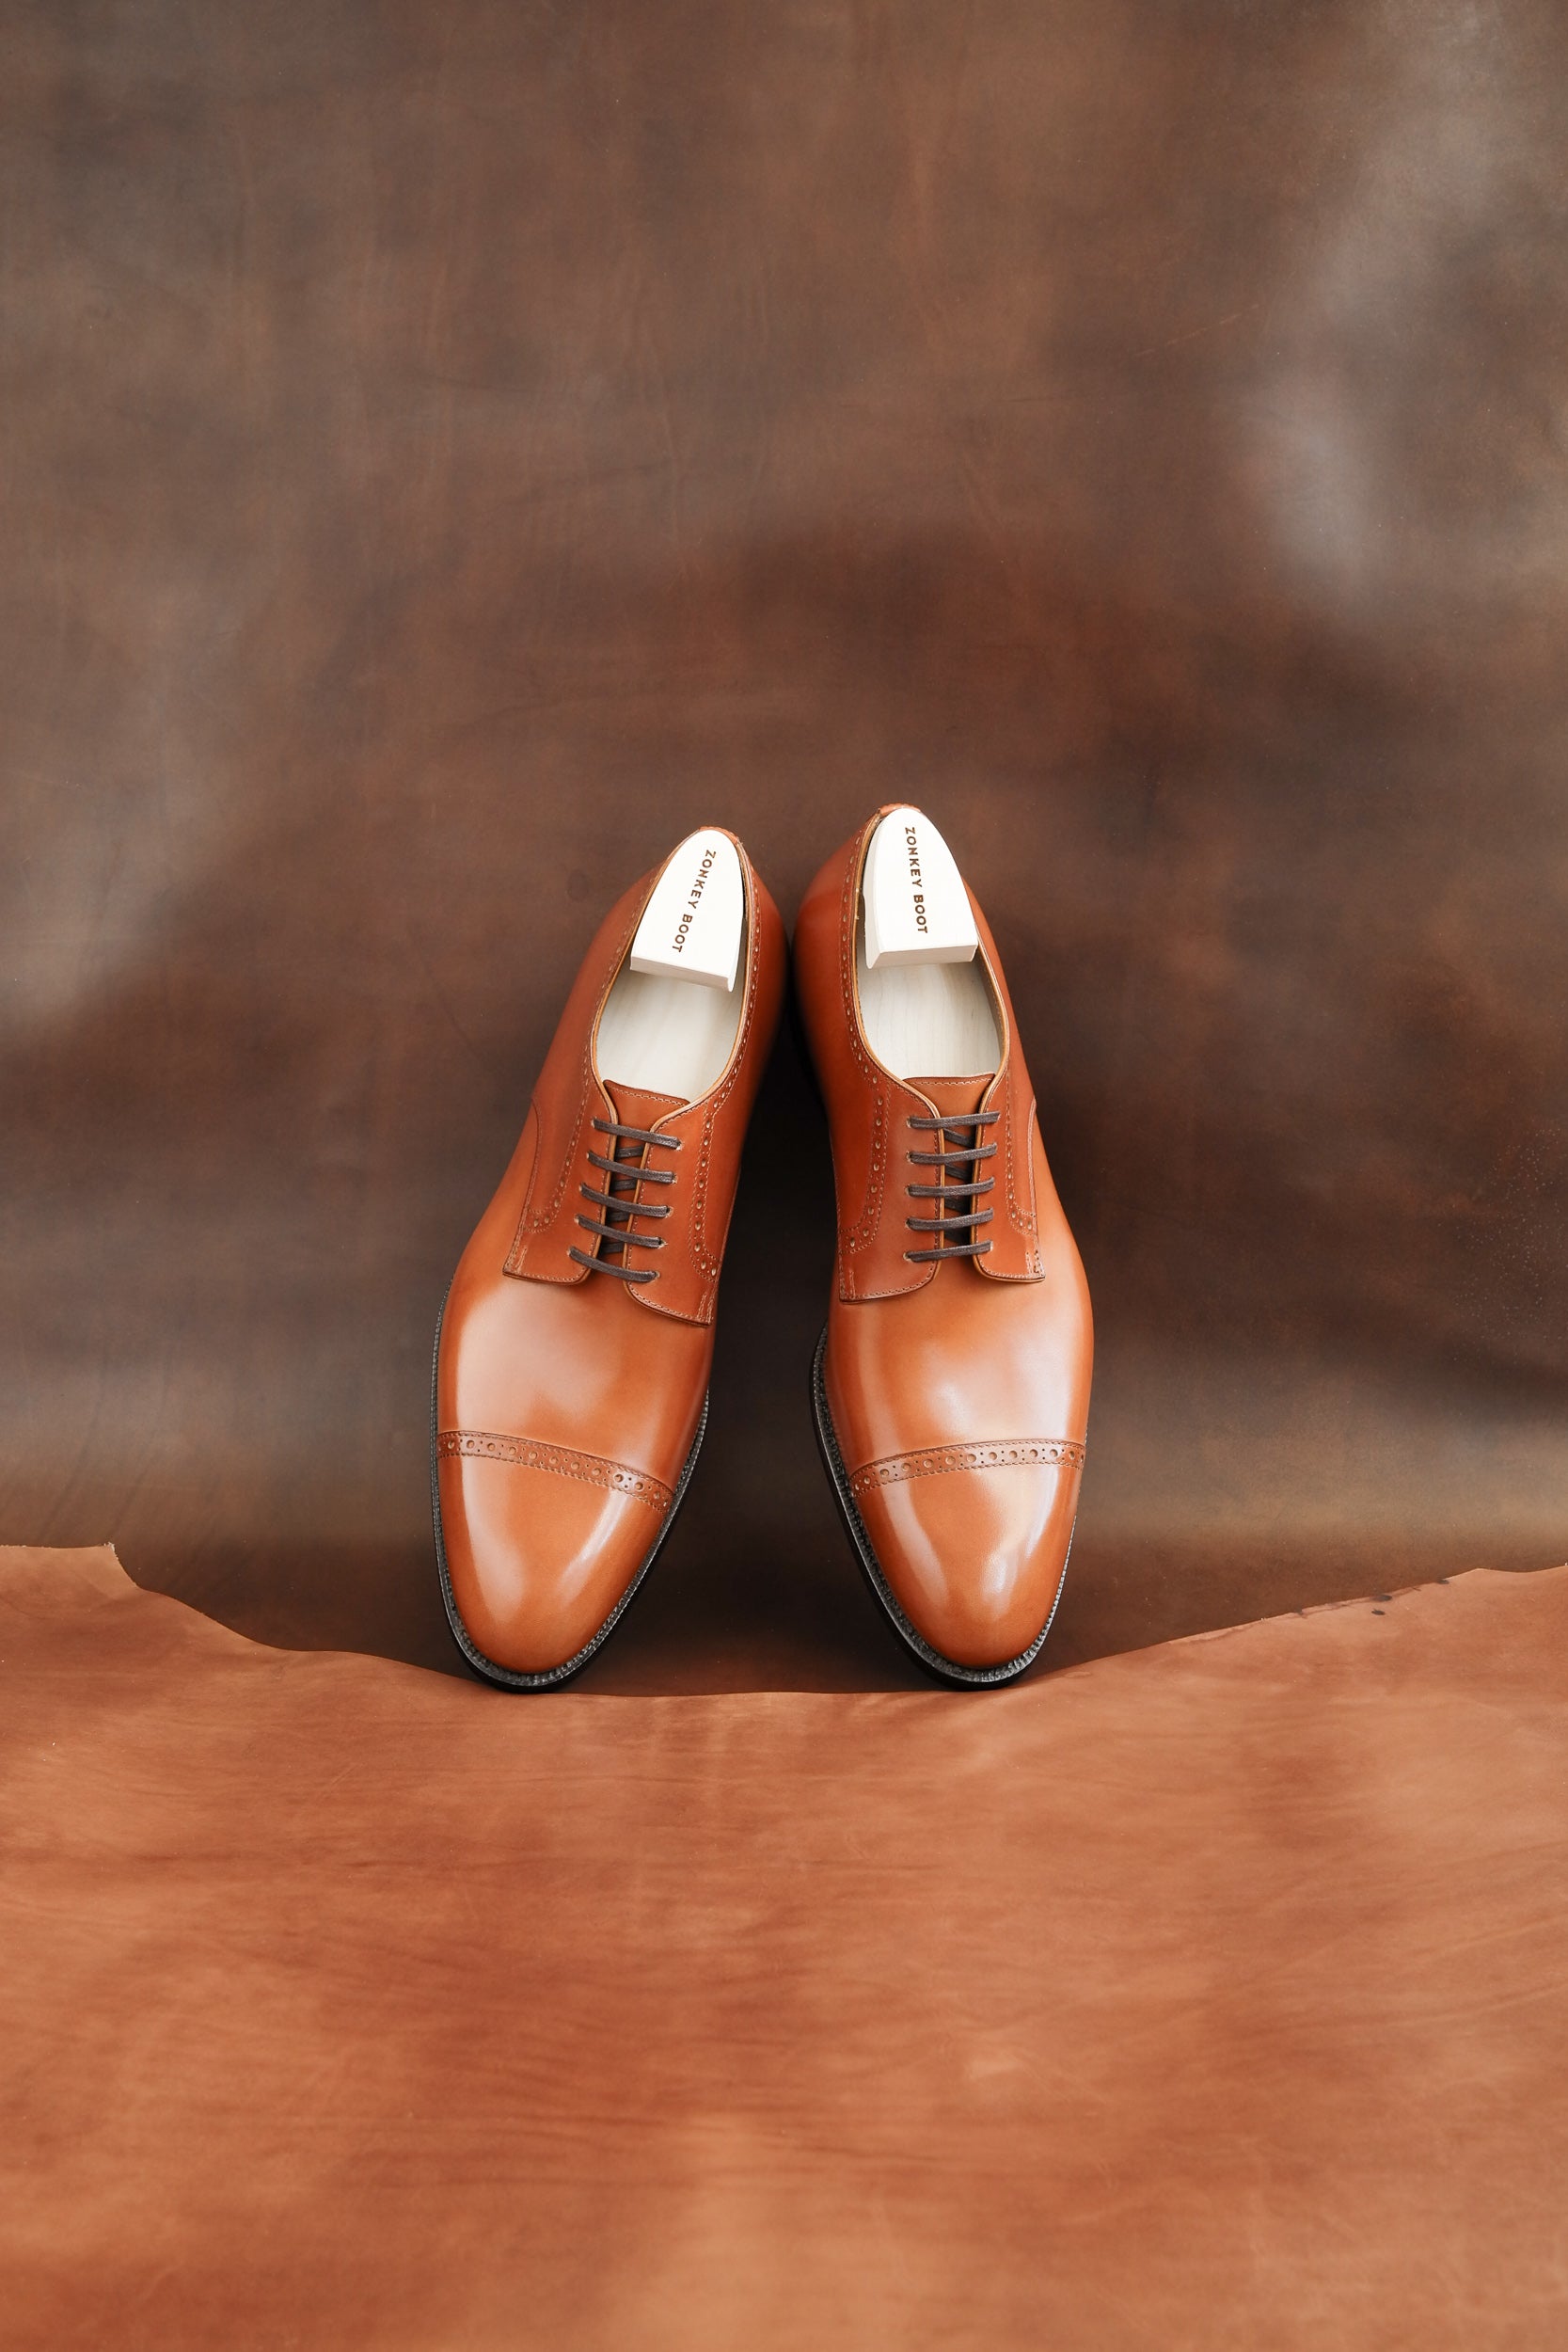 Zonkey Boot hand welted toe-cap derby shoes with brogueing